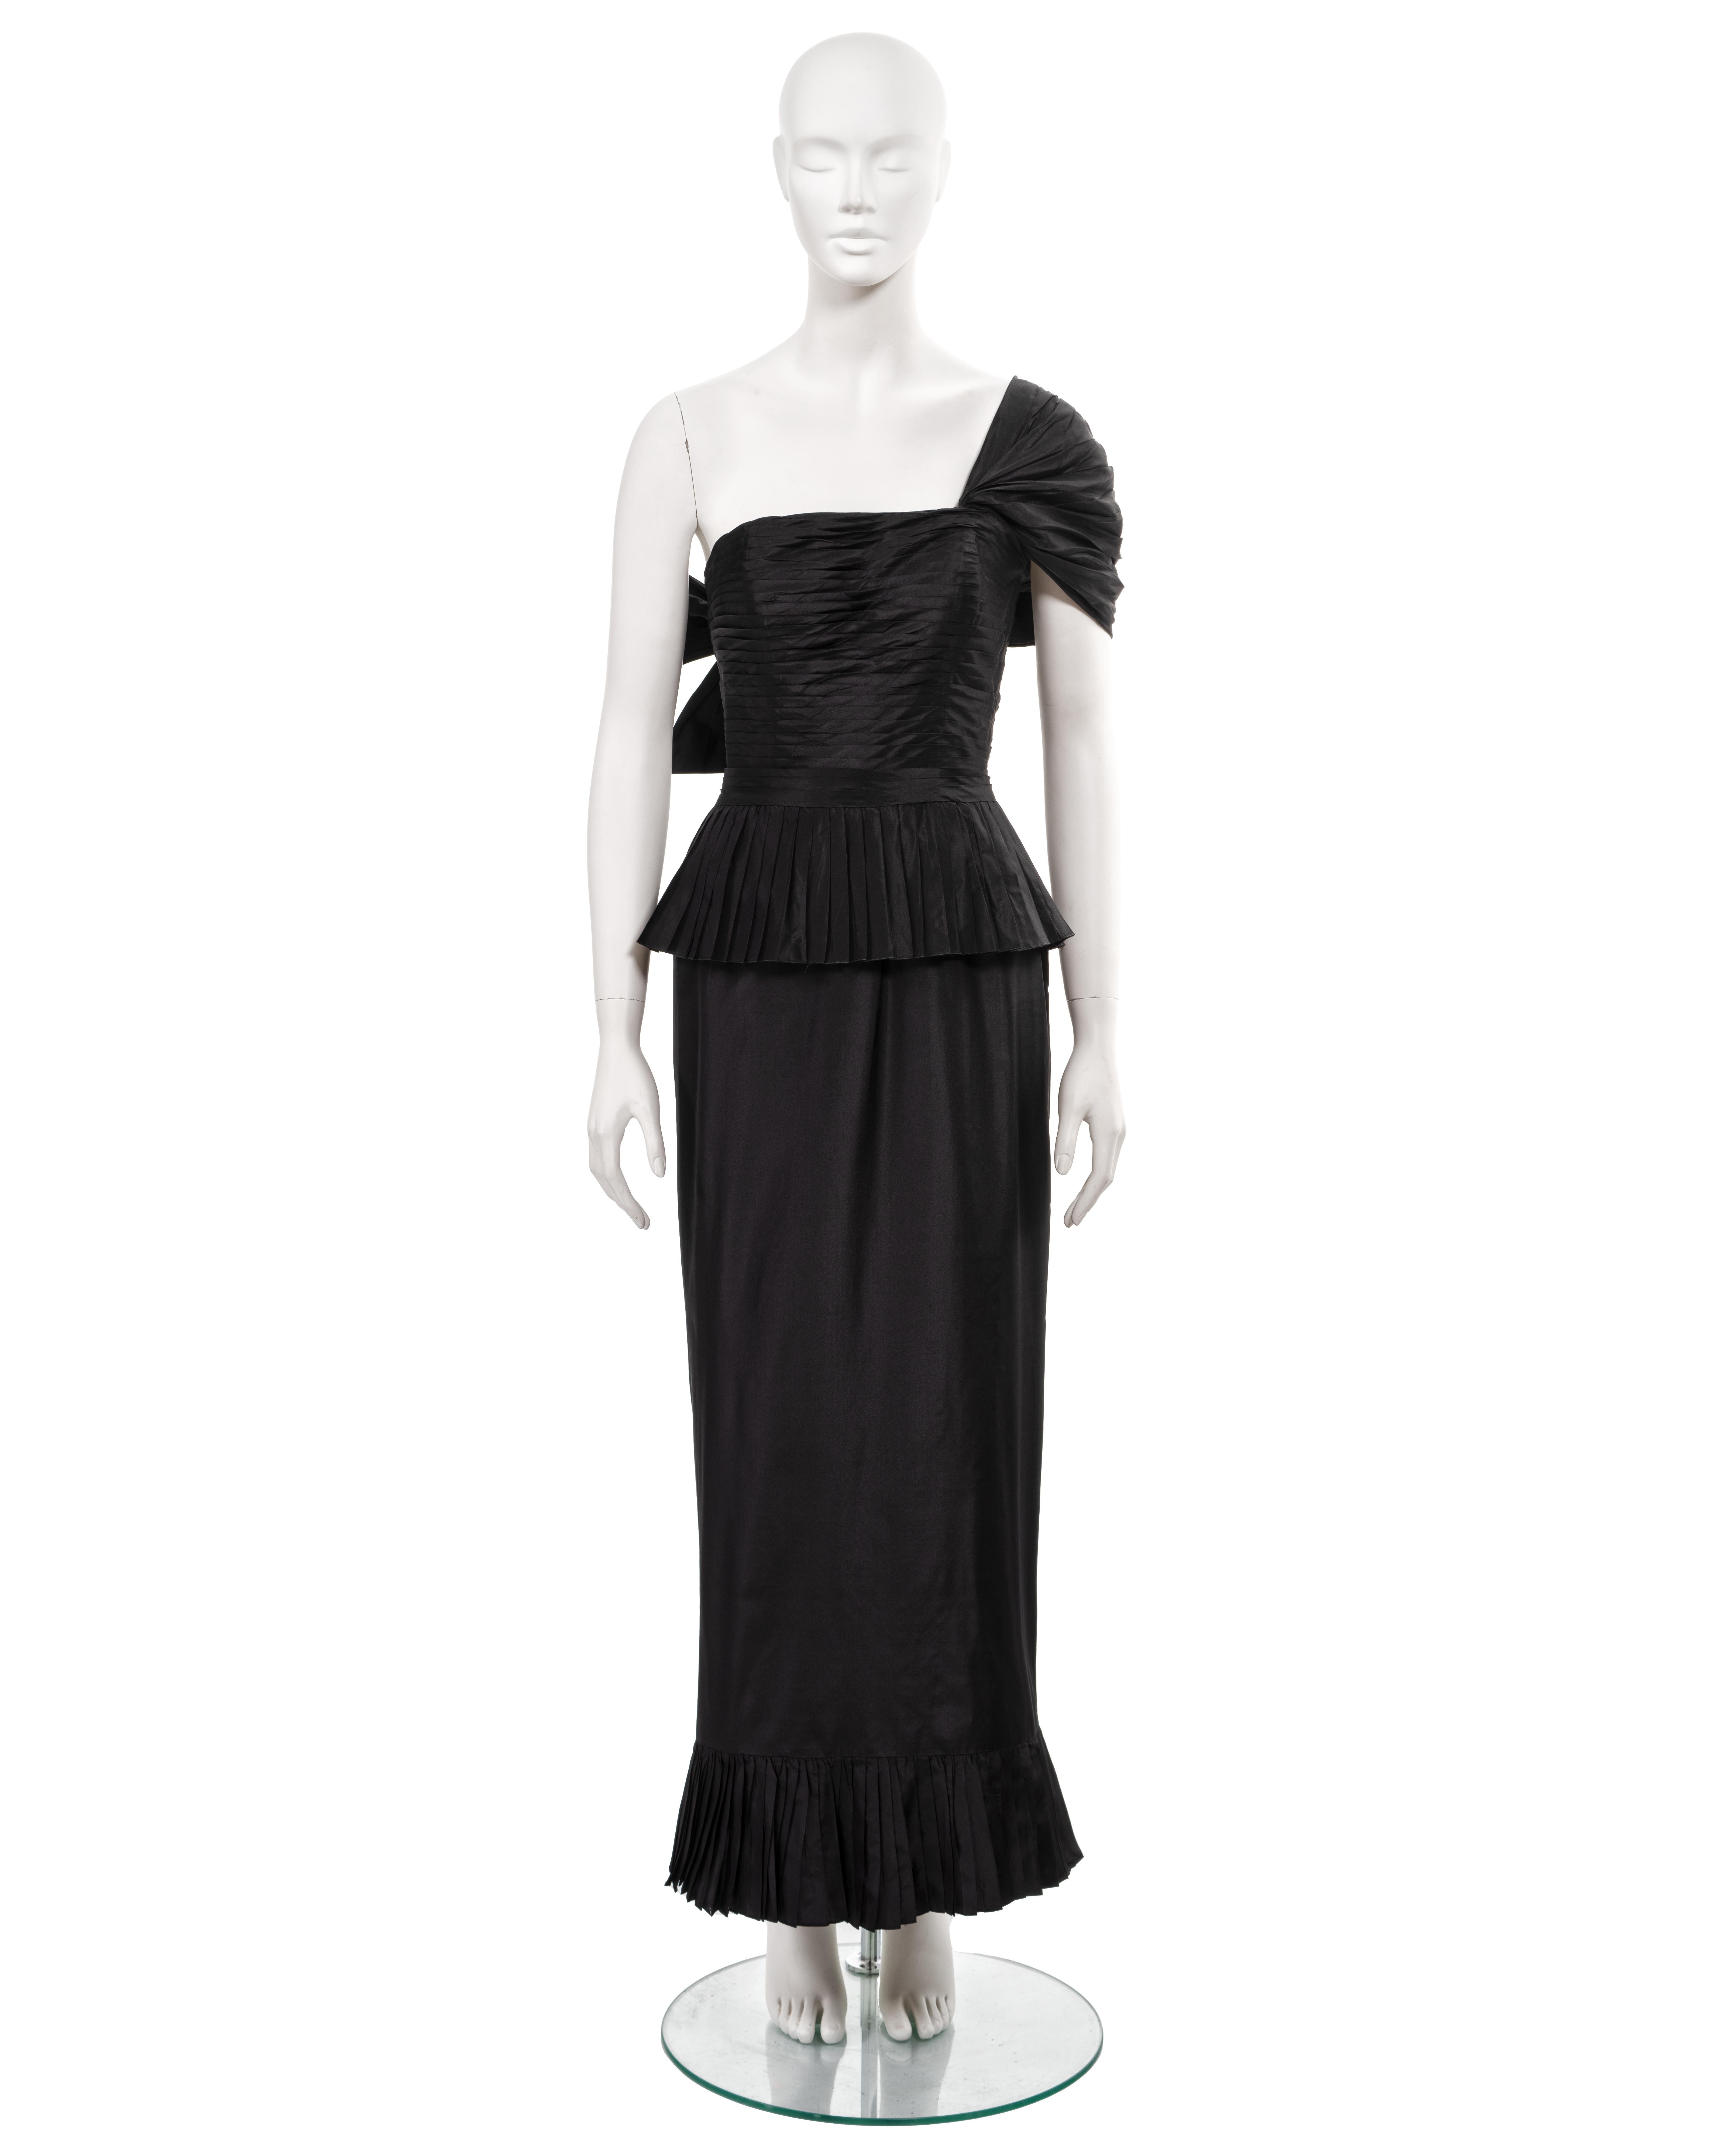 ▪ Chanel evening dress
▪ Creative Director: Karl Lagerfeld 
▪ Sold by One of a Kind Archive
▪ Spring-Summer 1986
▪ Constructed from black silk taffeta 
▪ Fitted bodice with horizontal pleats 
▪ Asymmetric draped shoulder strap finishing with a bow